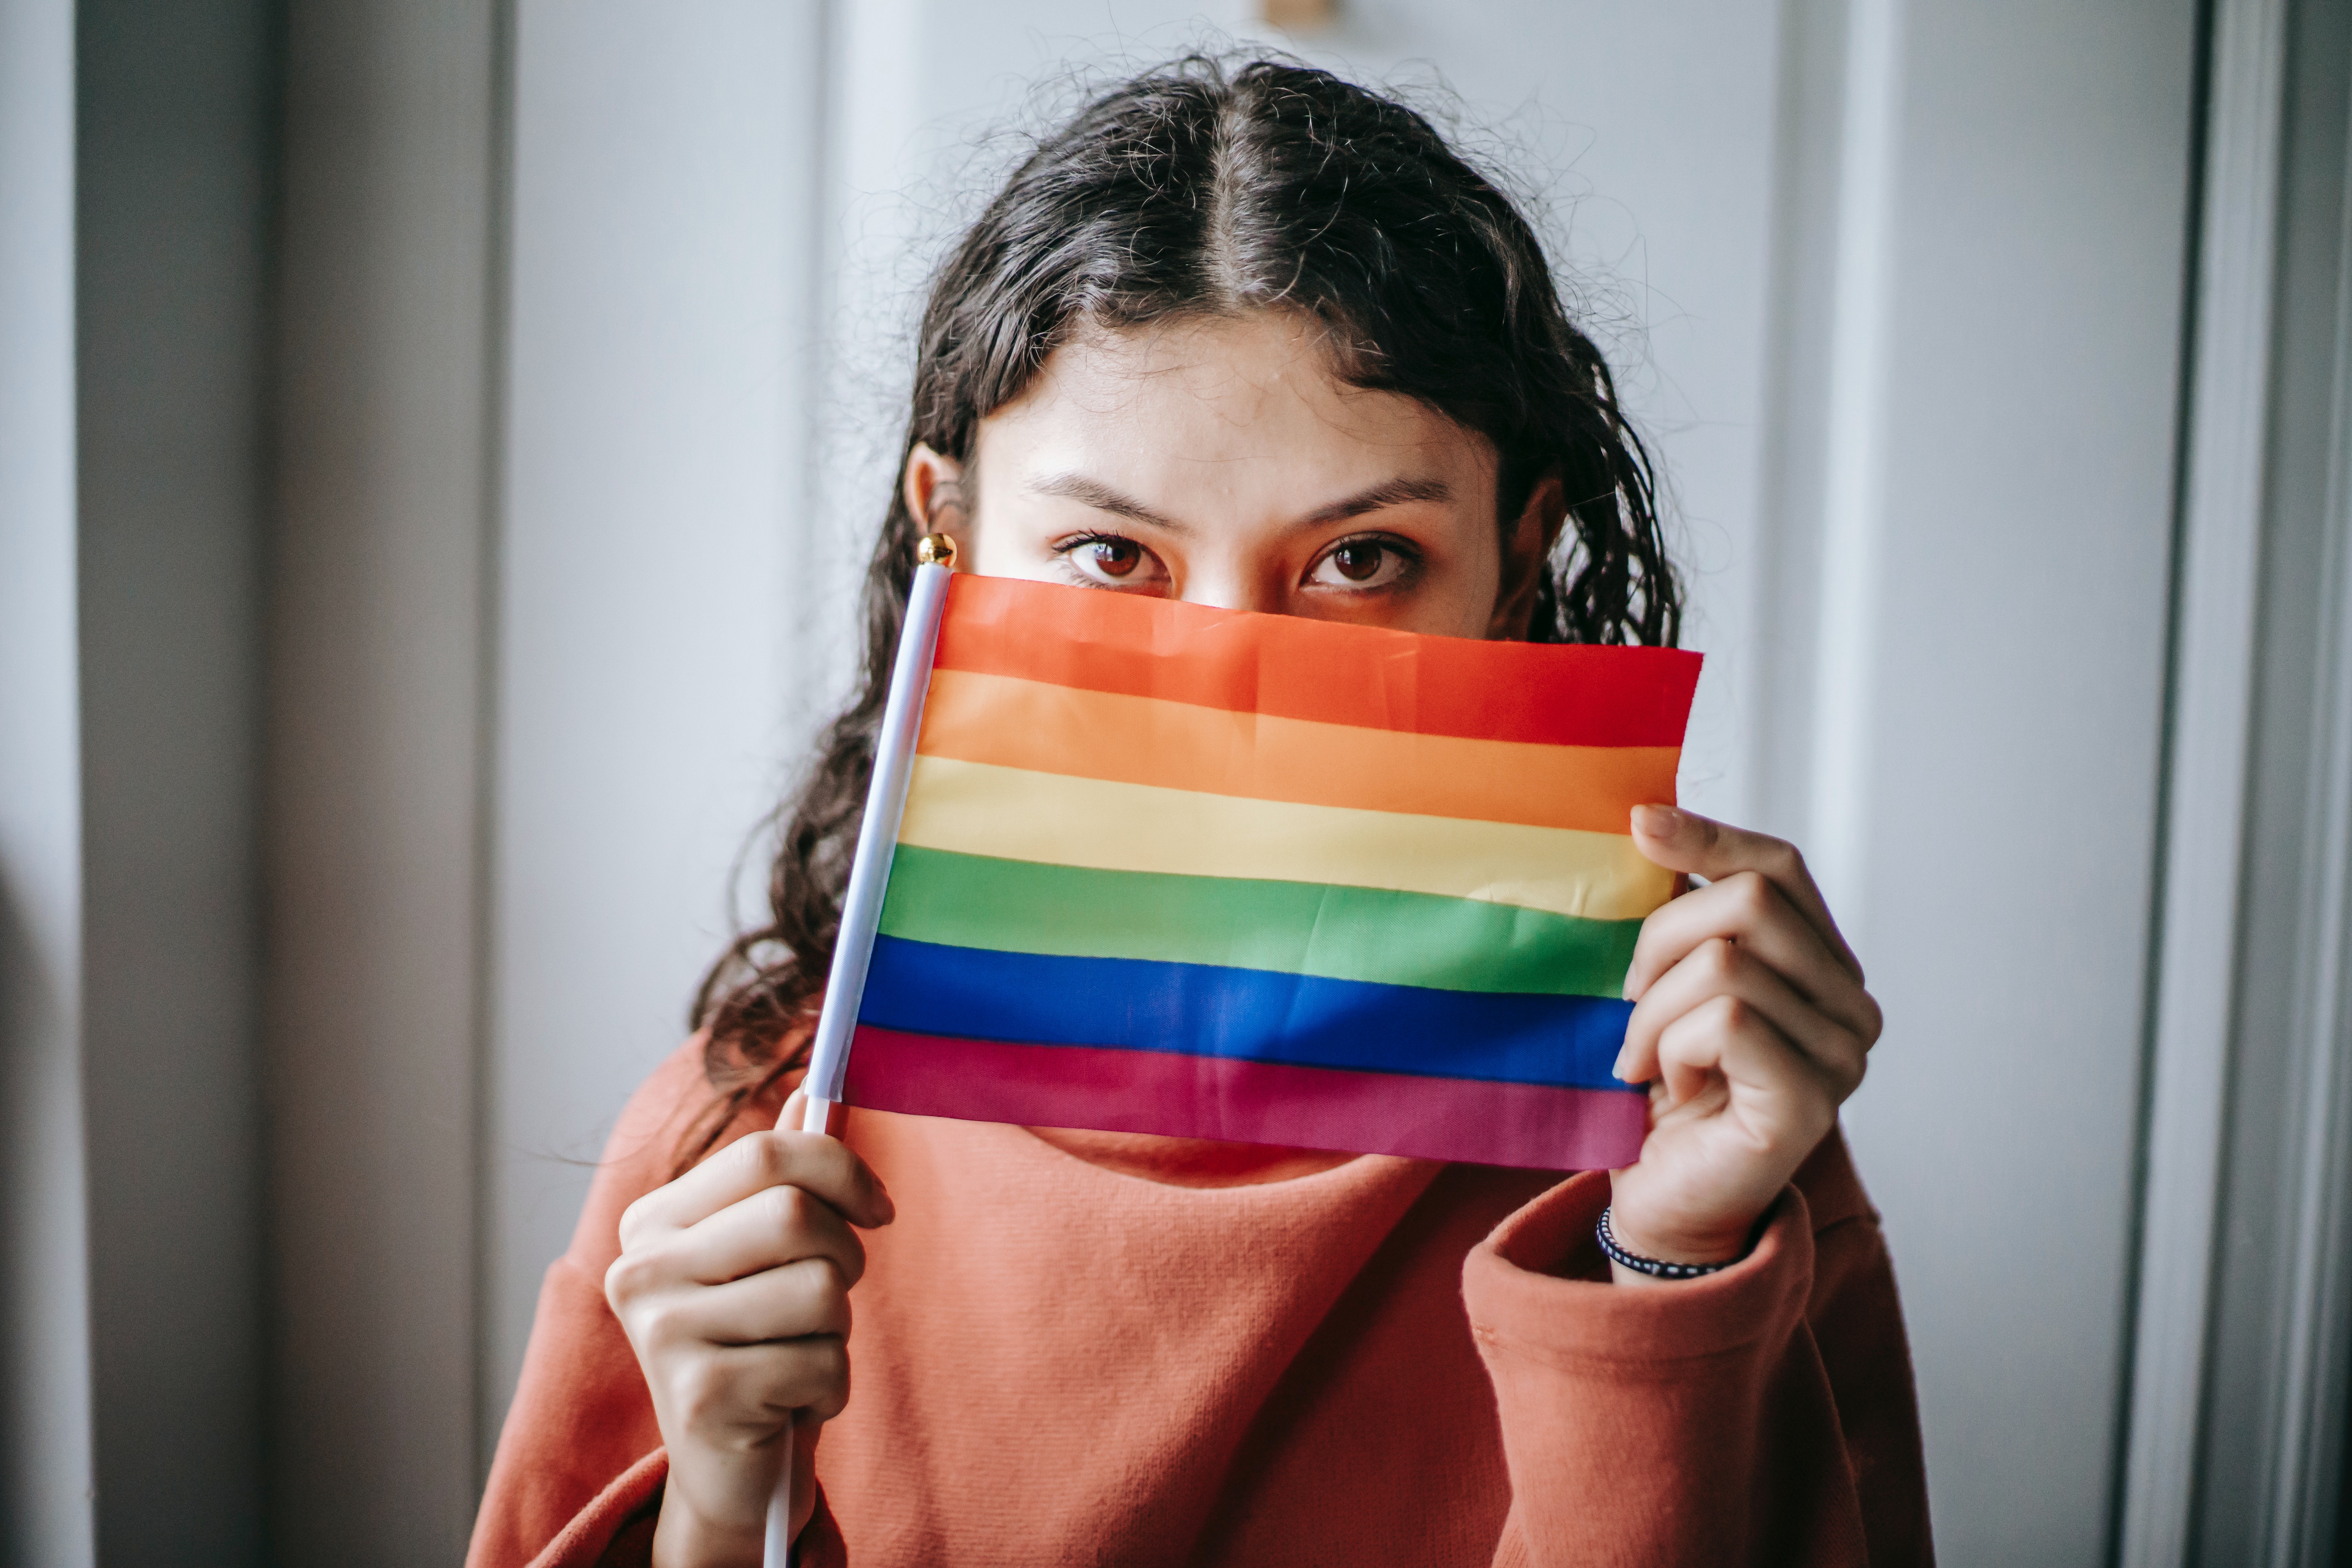 A woman with curly hair covers half her face with the pride flag.